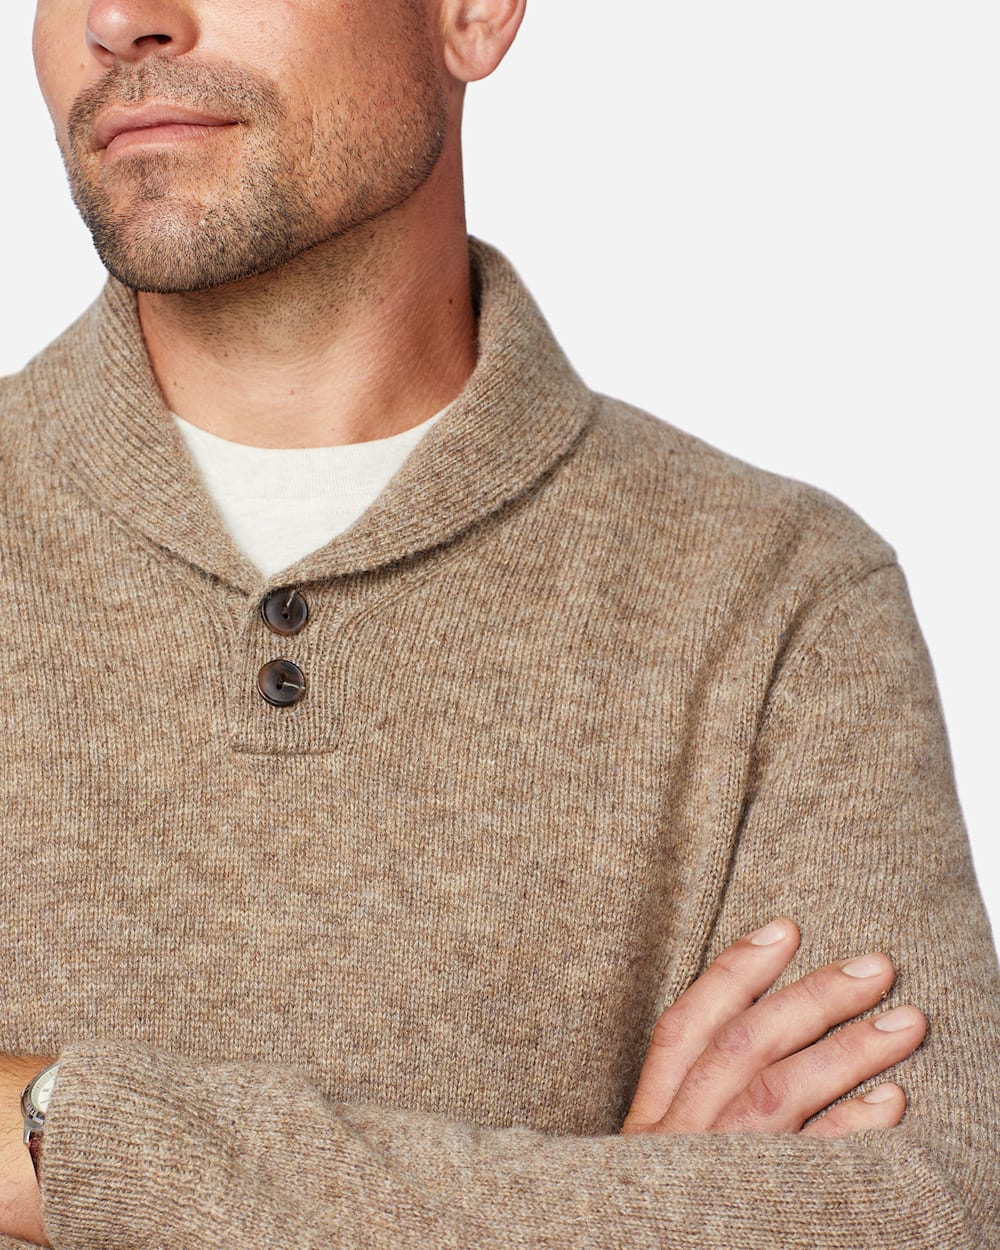 ALTERNATE VIEW OF MEN'S SHETLAND SHAWL PULLOVER IN COYOTE TAN HEATHER image number 3